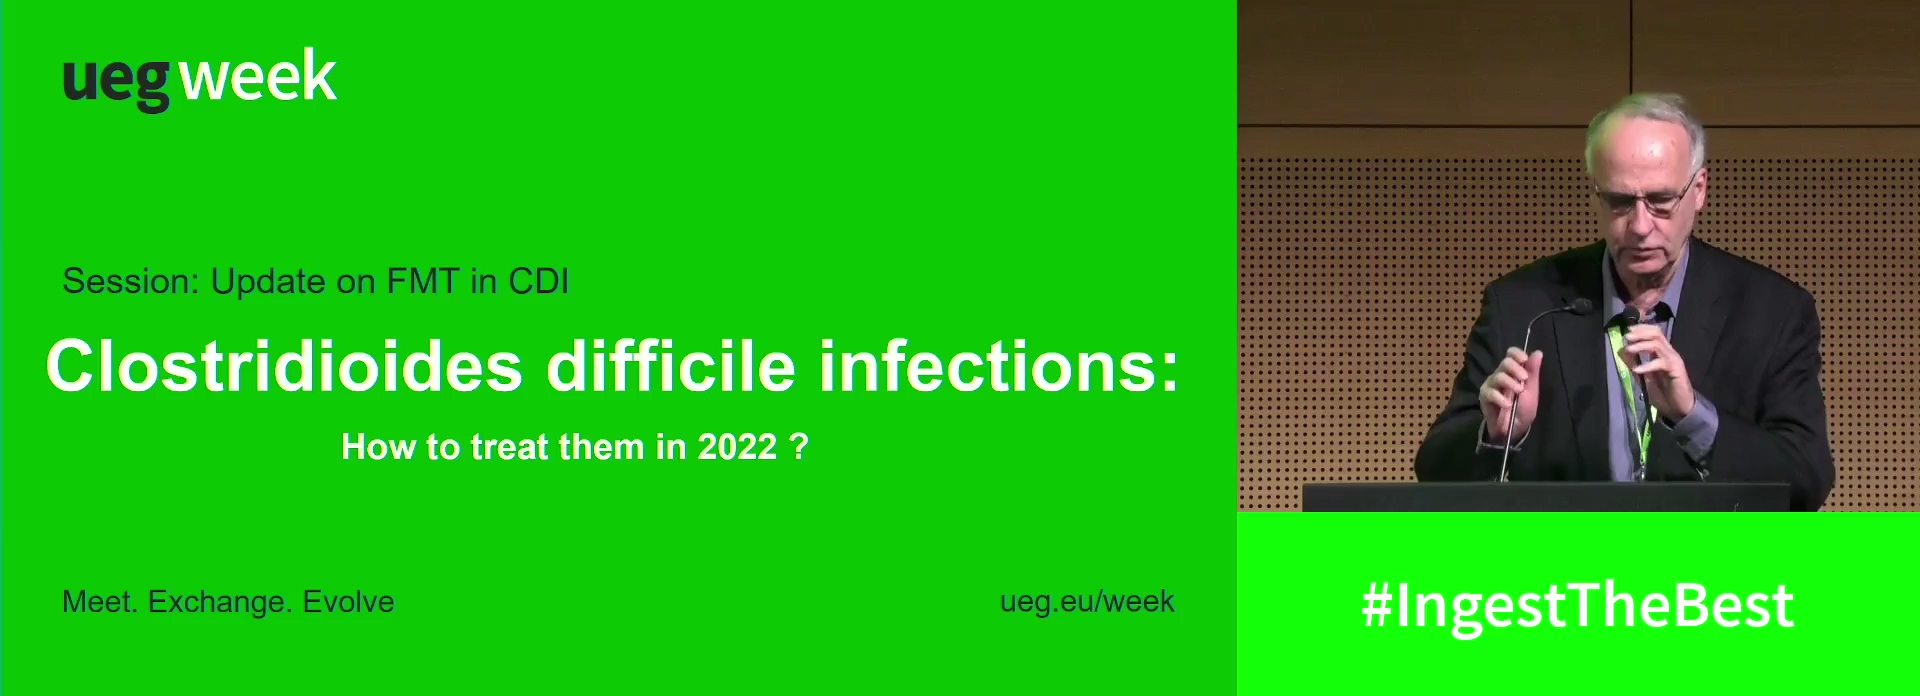 Clostridium difficile infections: How to treat them in 2022